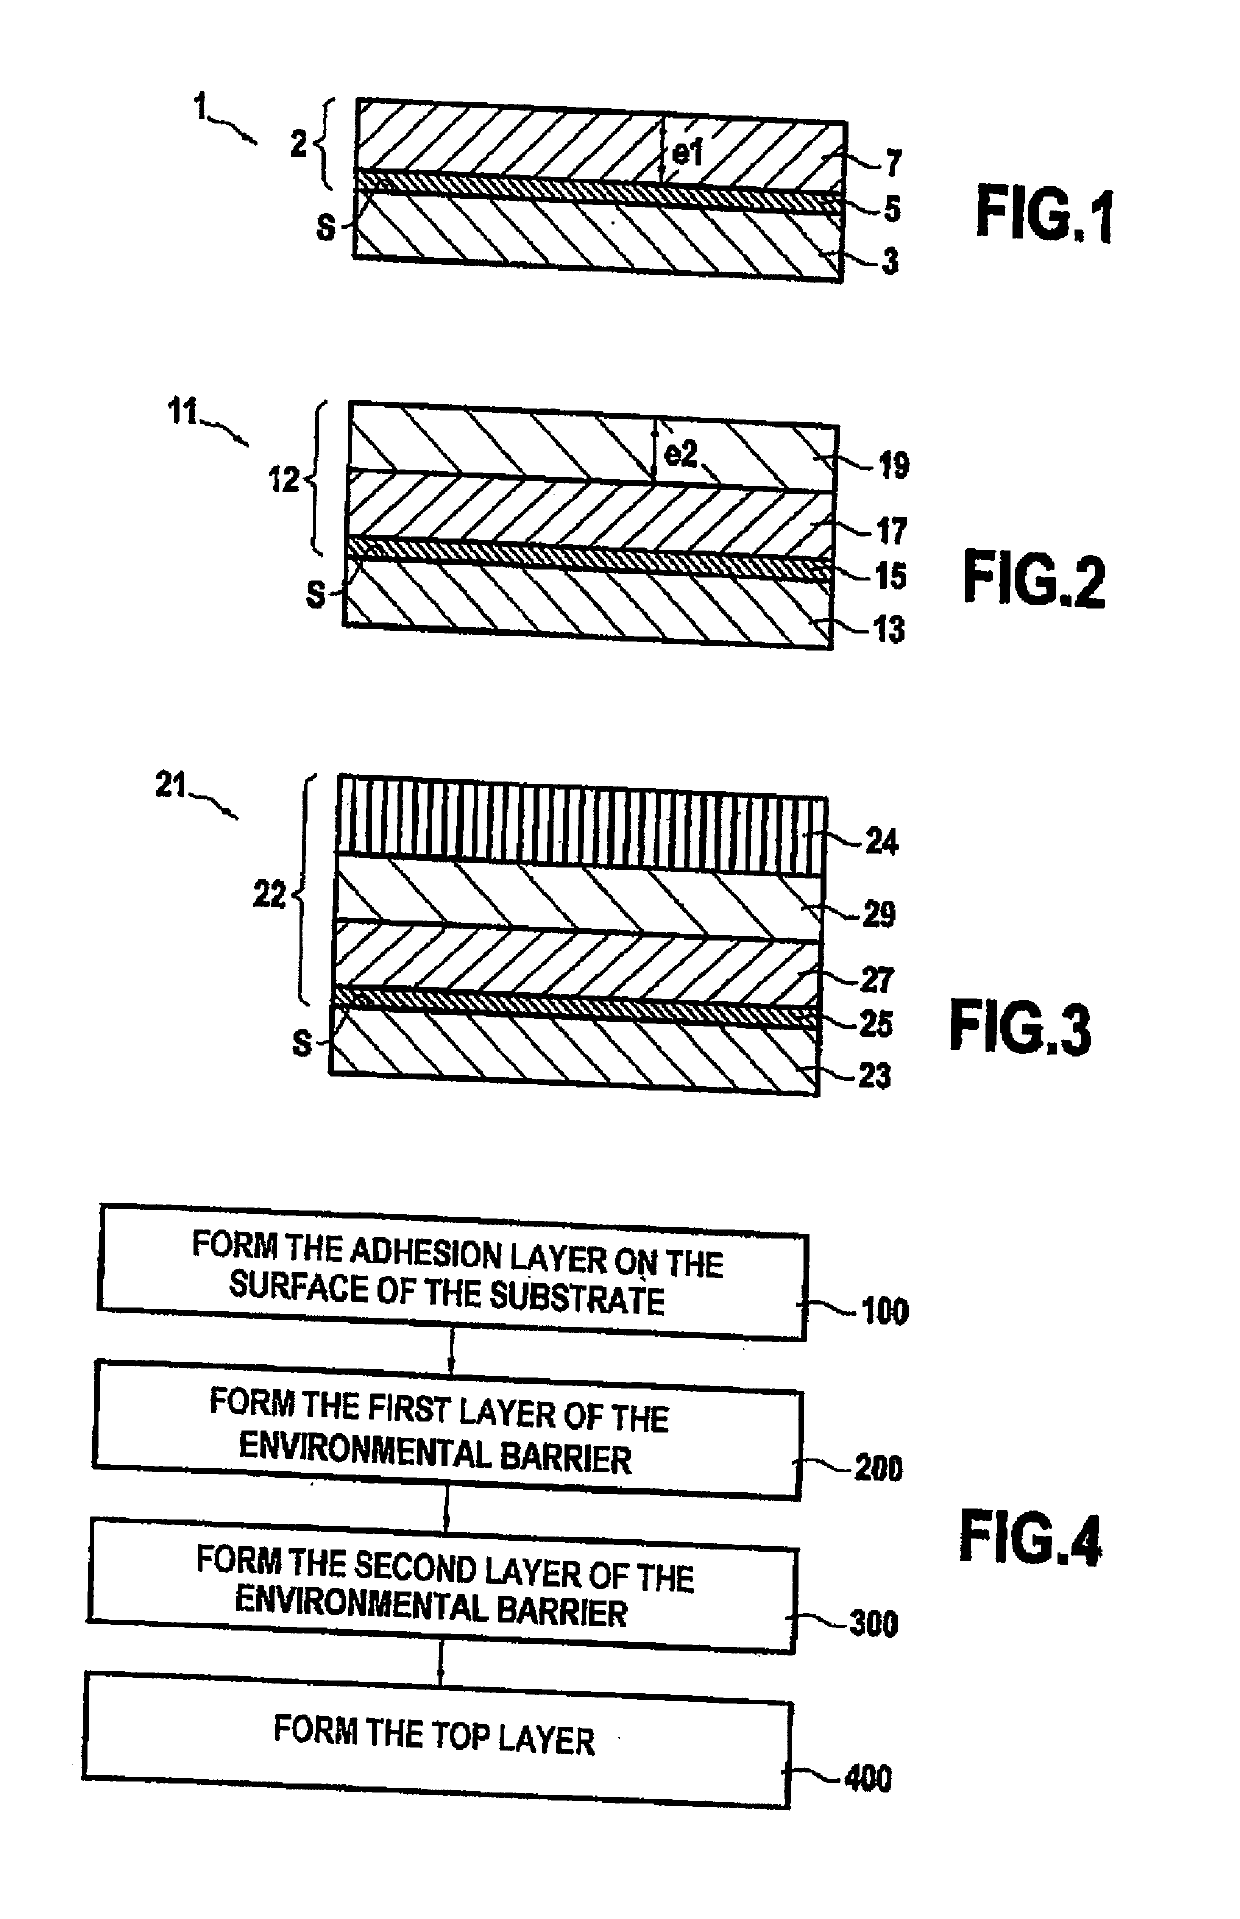 Part comprising a substrate and an environmental barrier